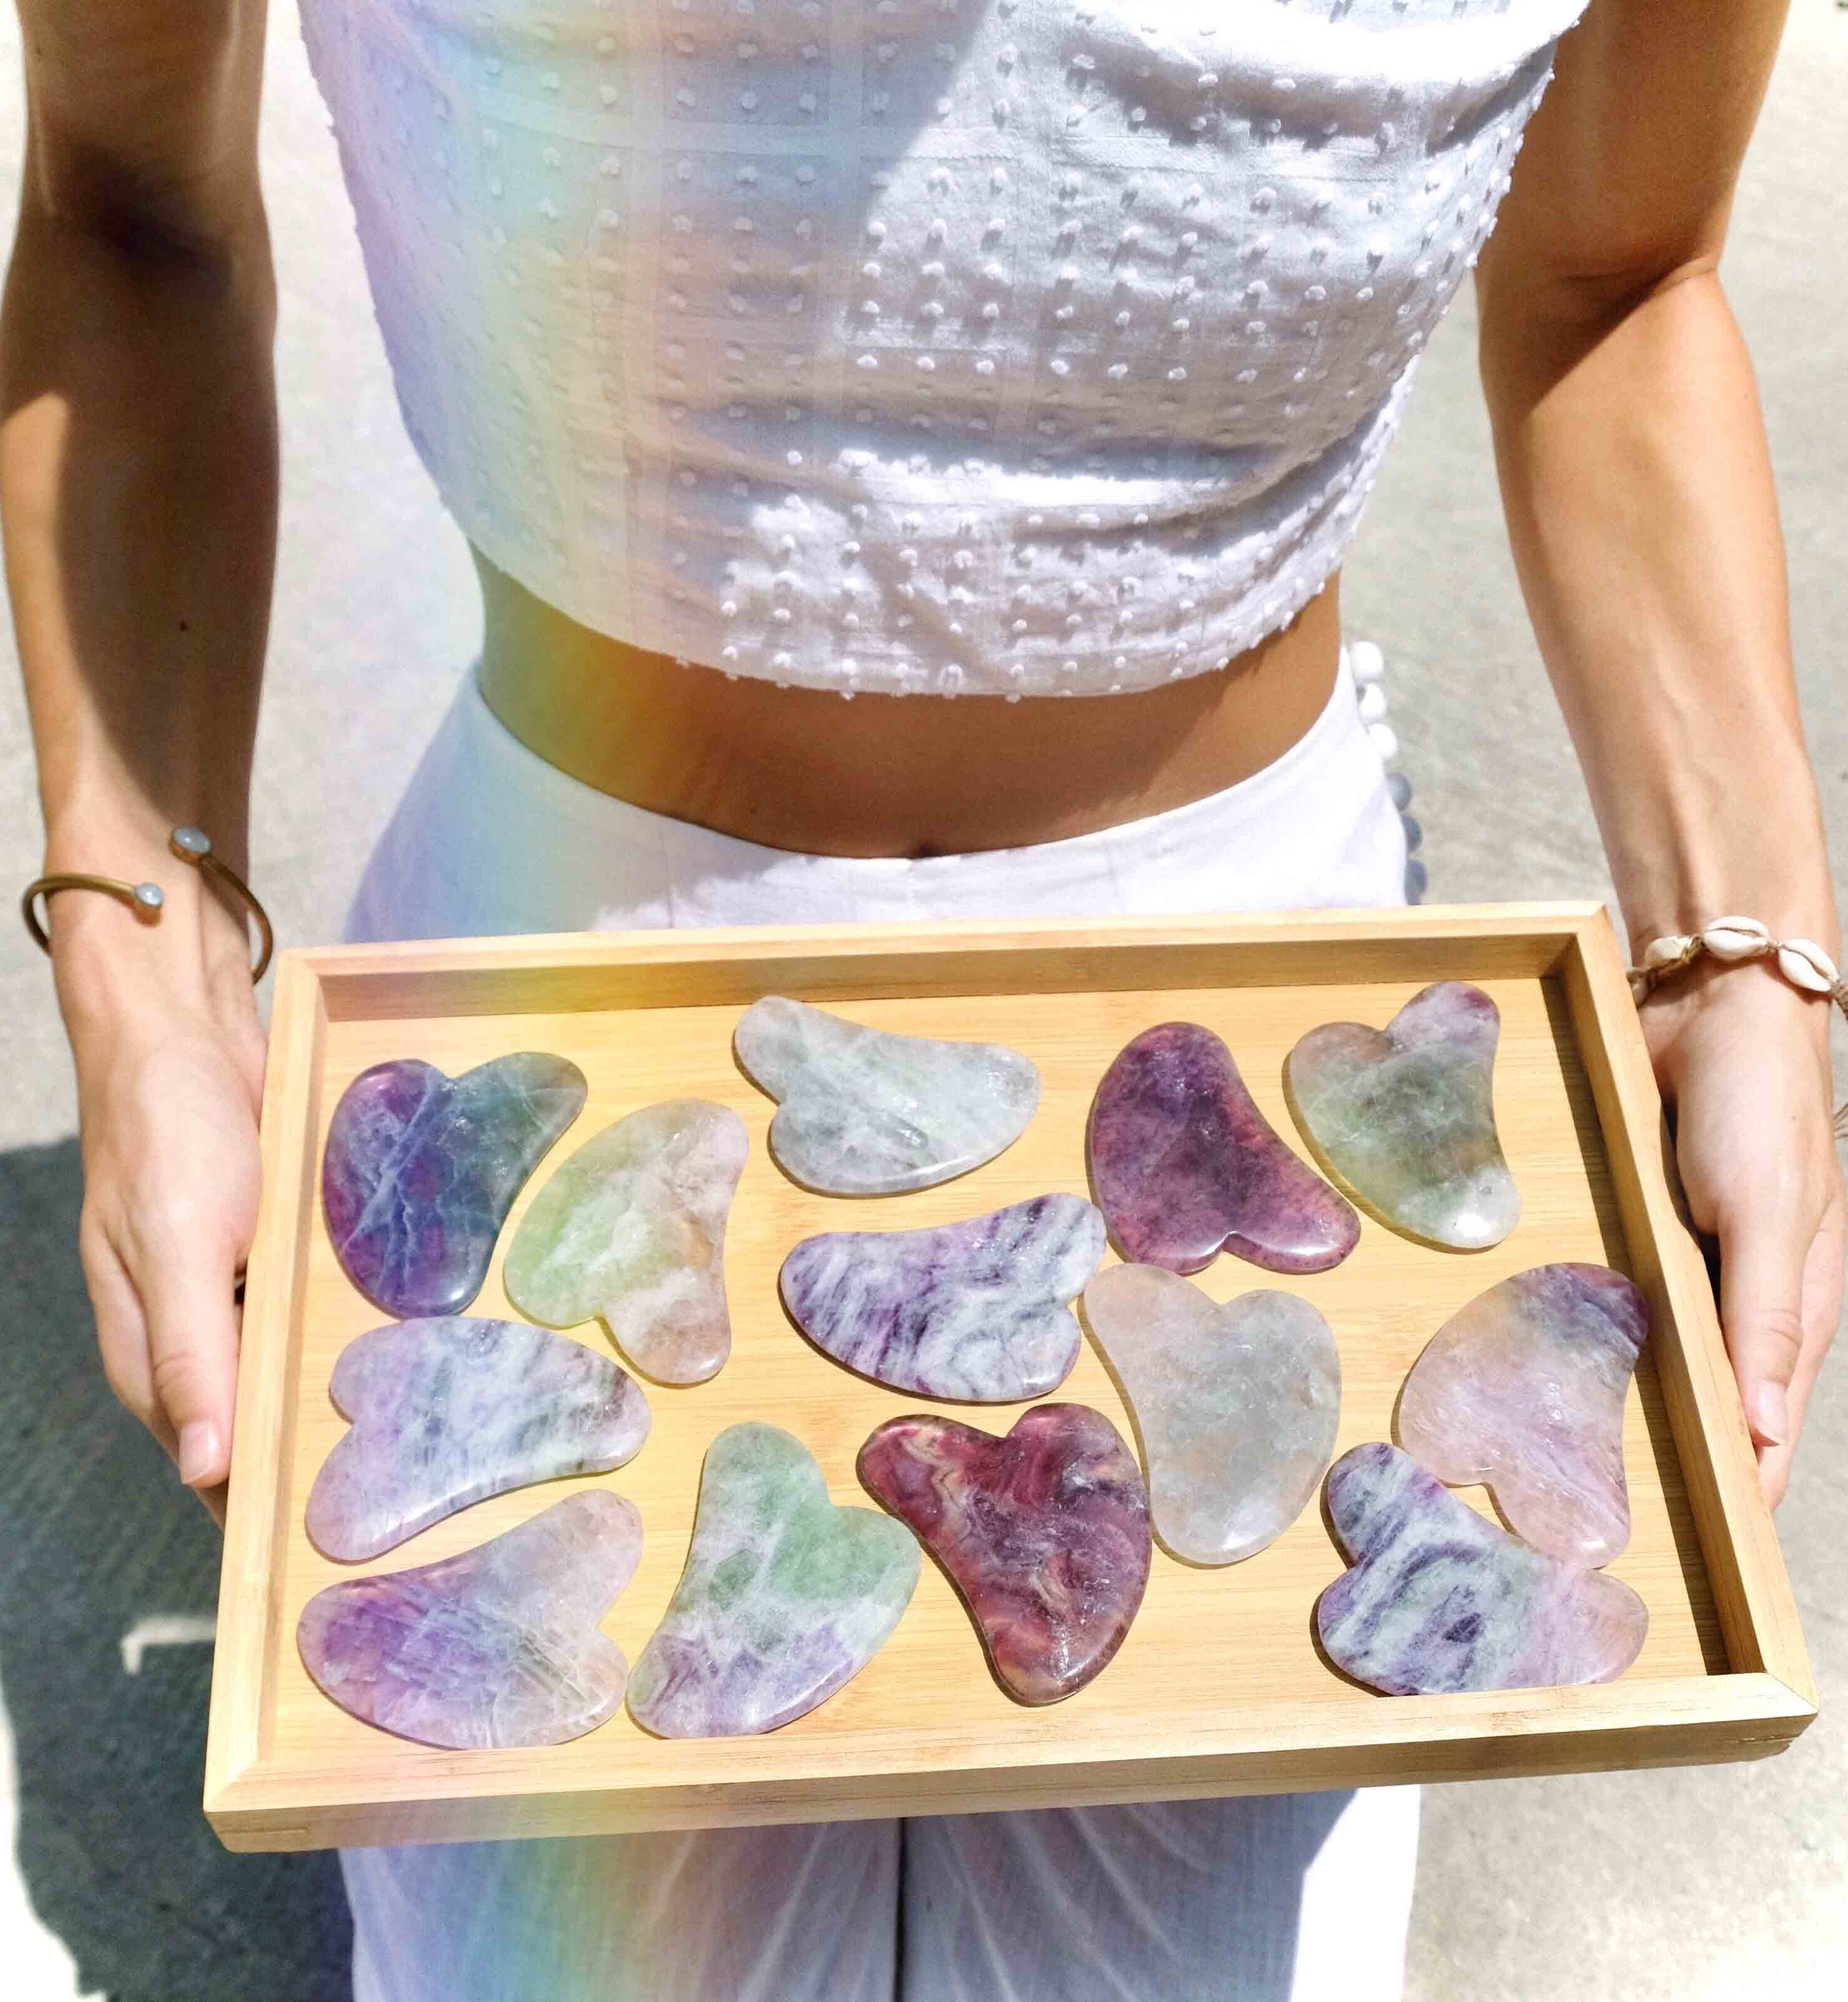 Fluorite Gua Sha The at Home Beauty Tool for Glowing and Firmer Skin